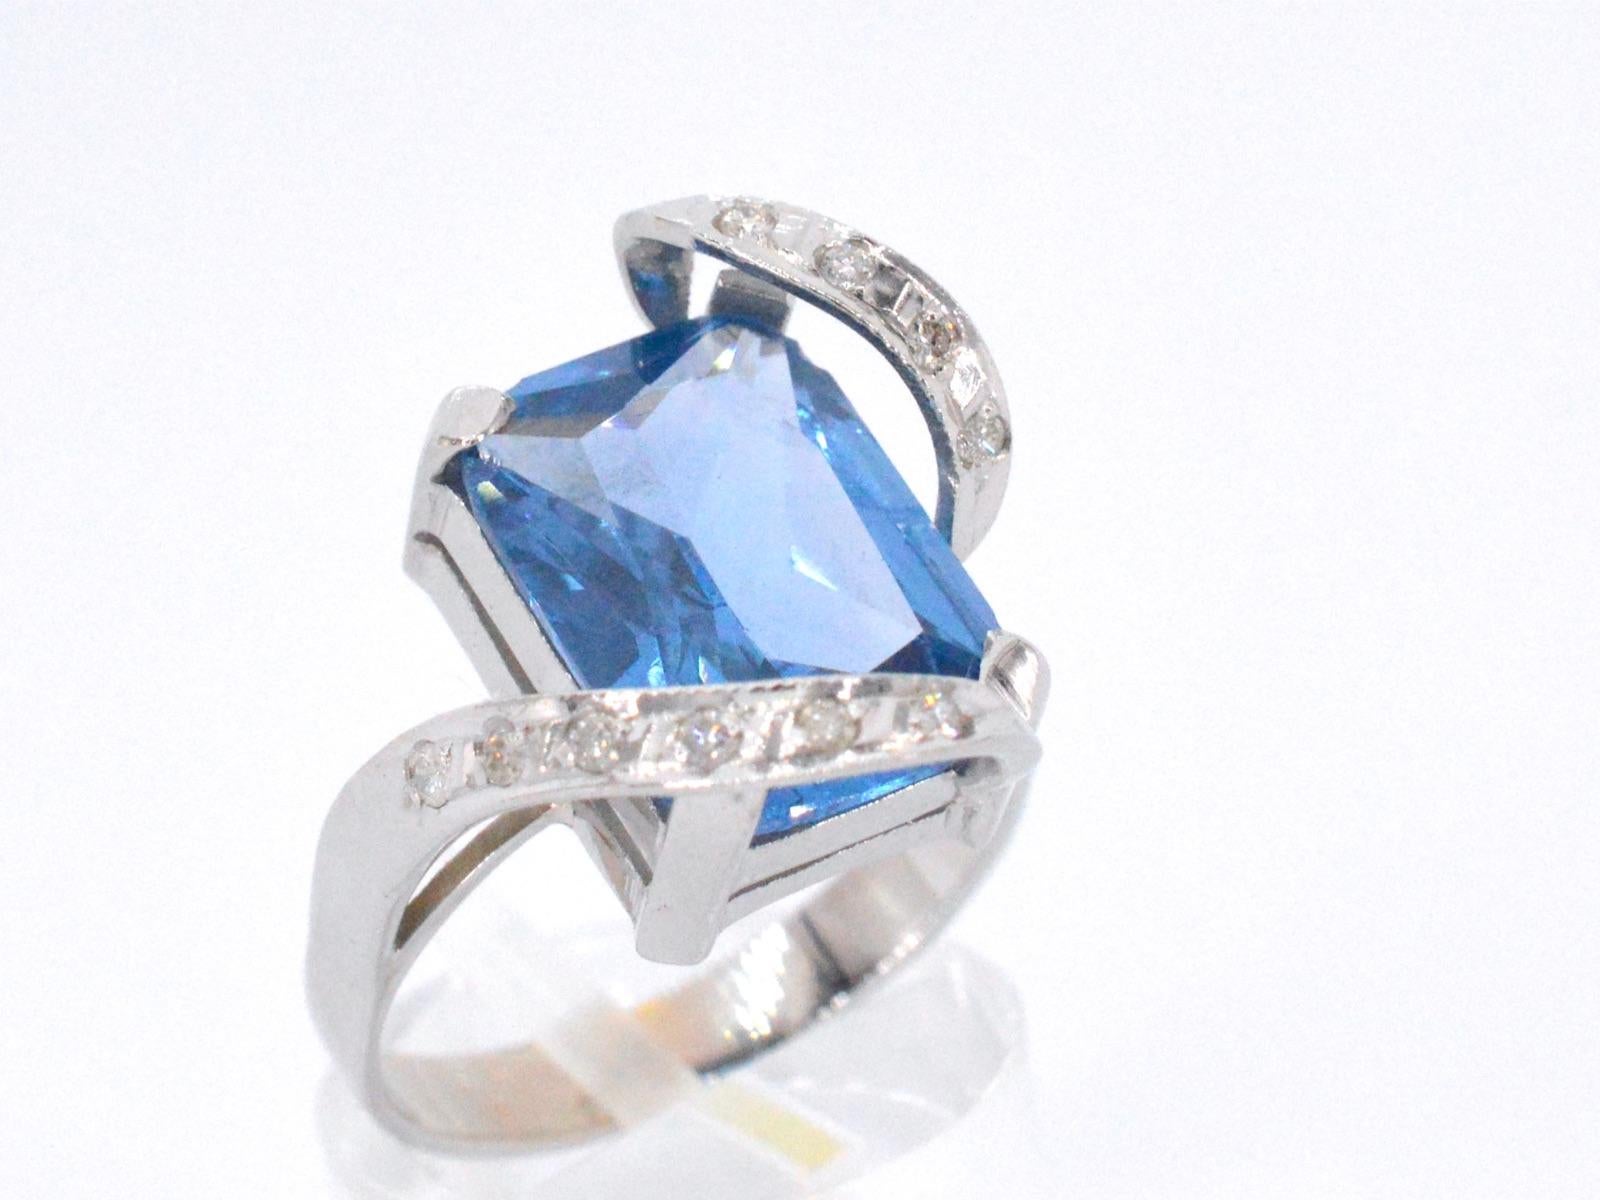 Brilliant Cut White gold diamond ring with a blue gemstone For Sale